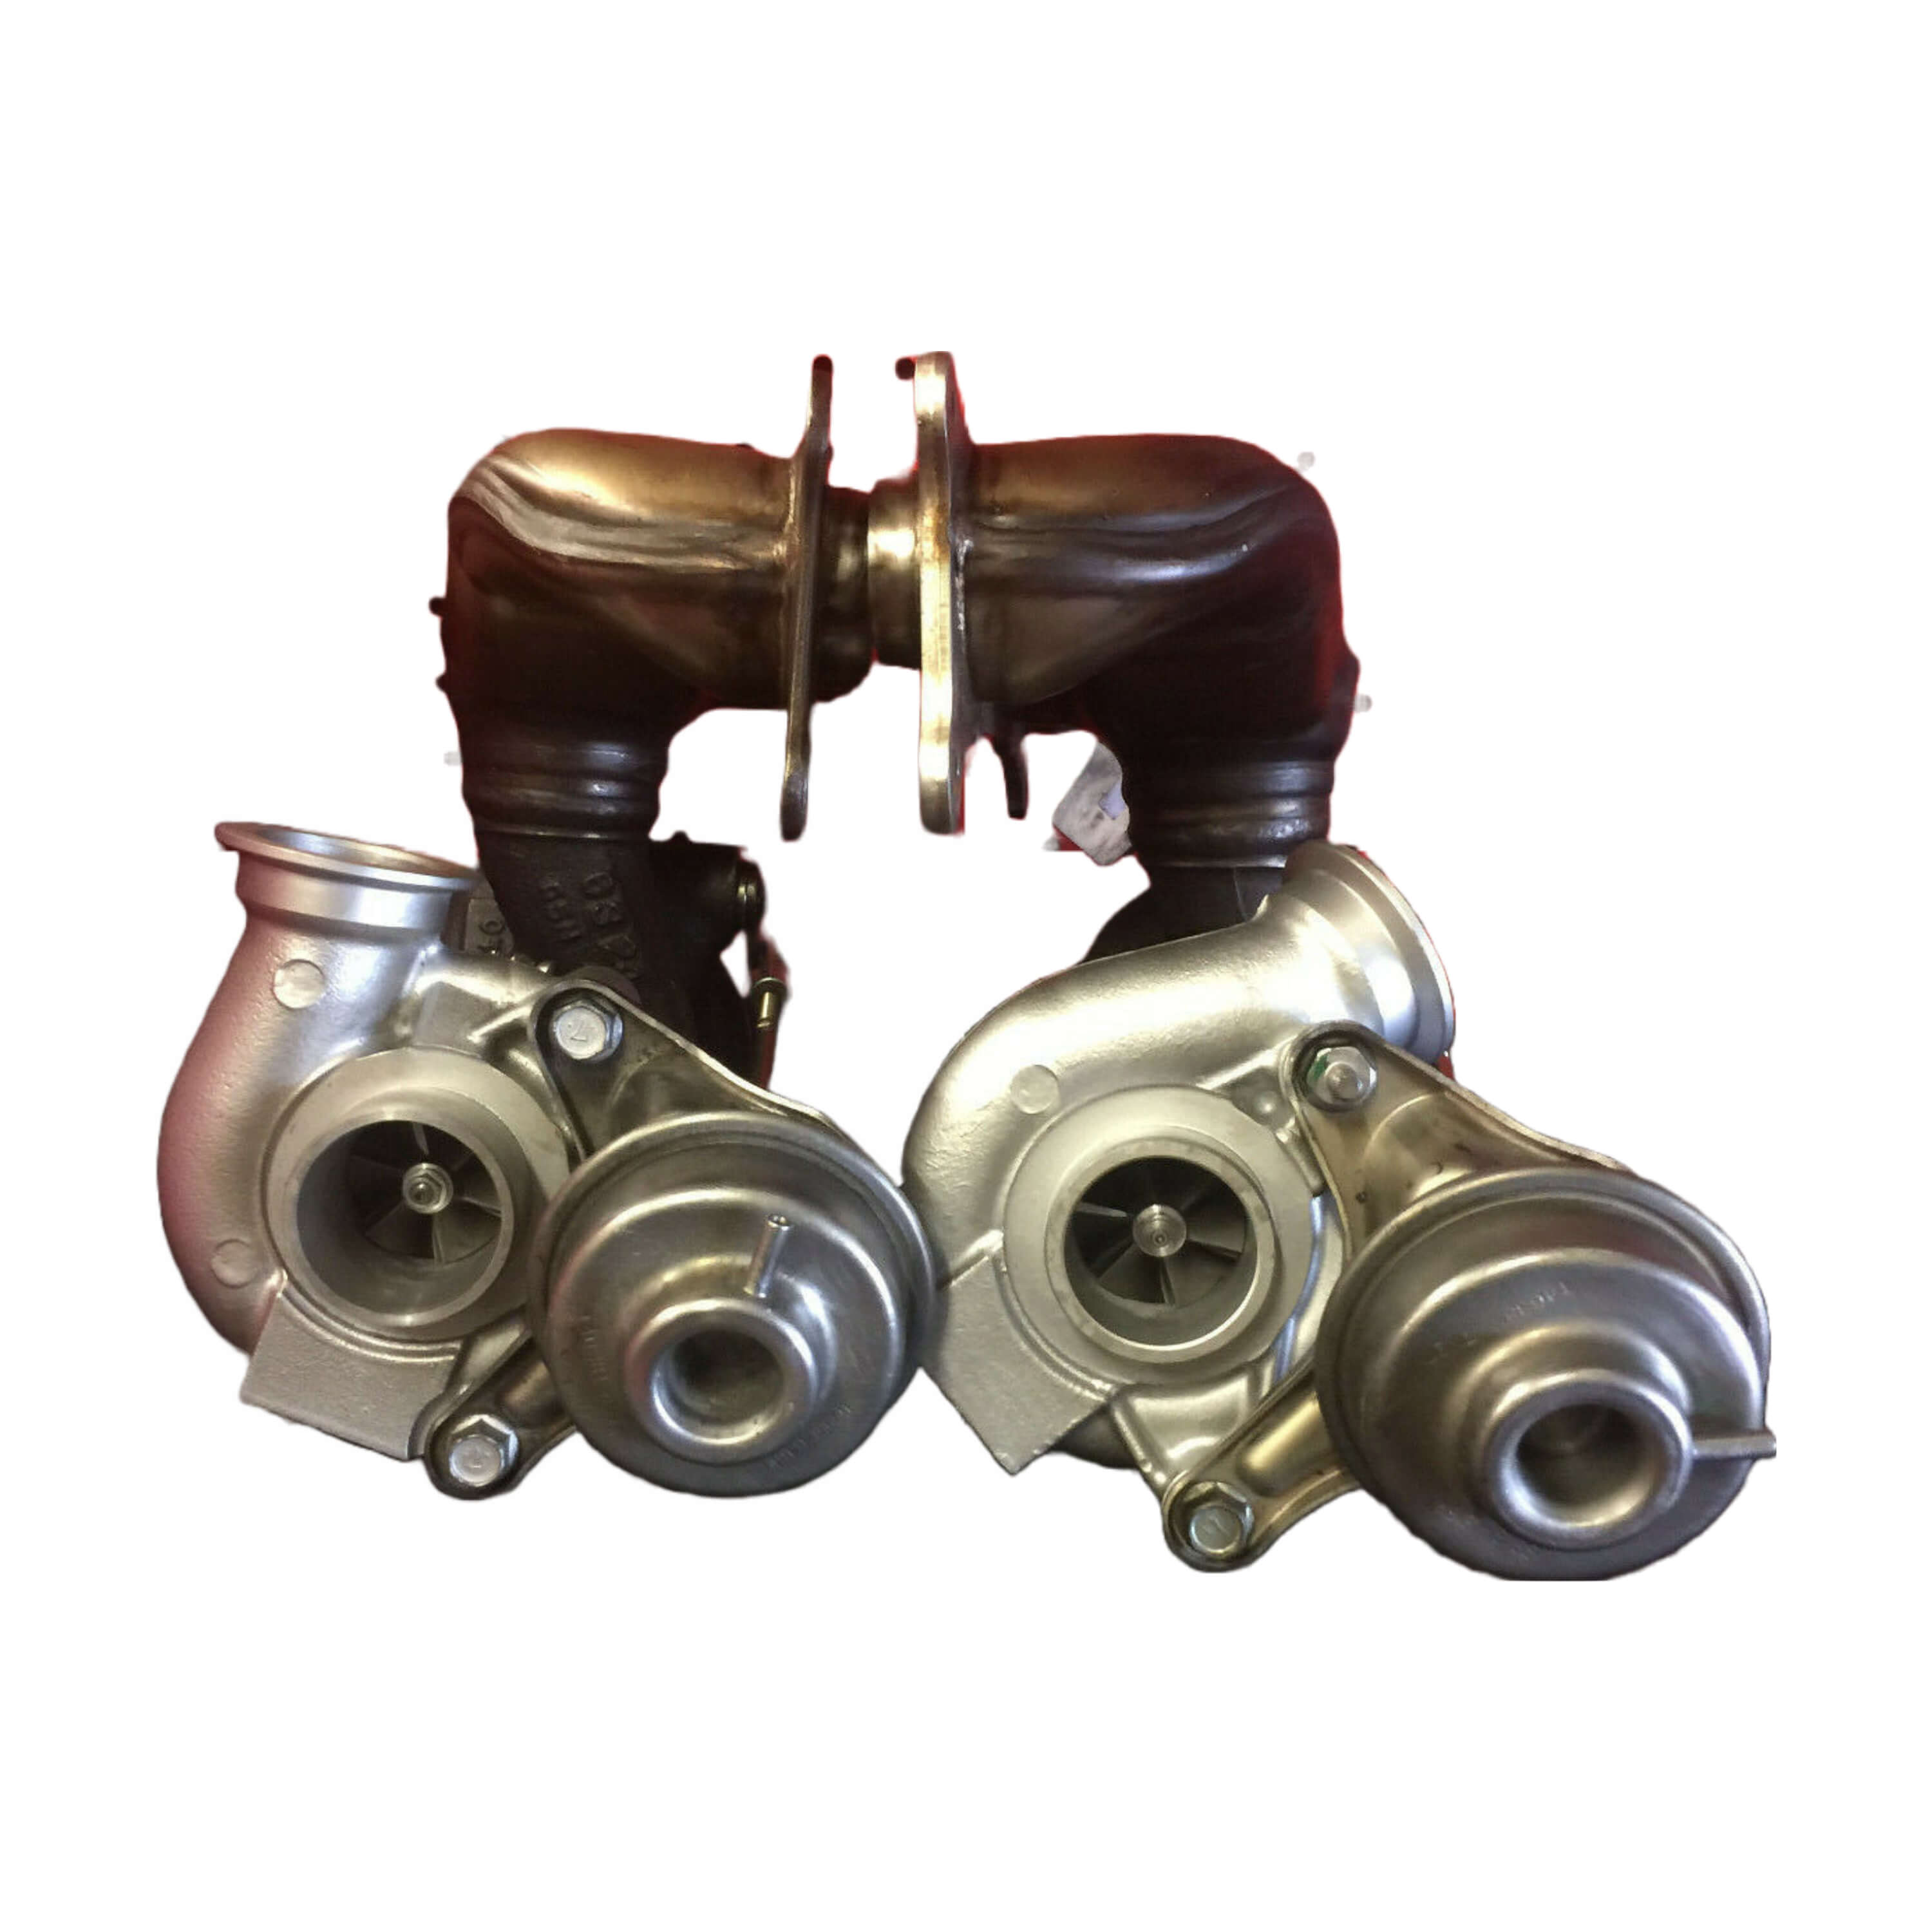 BMW E90 335i is N54 14T - Pair of Upgraded Turbochargers 07-10